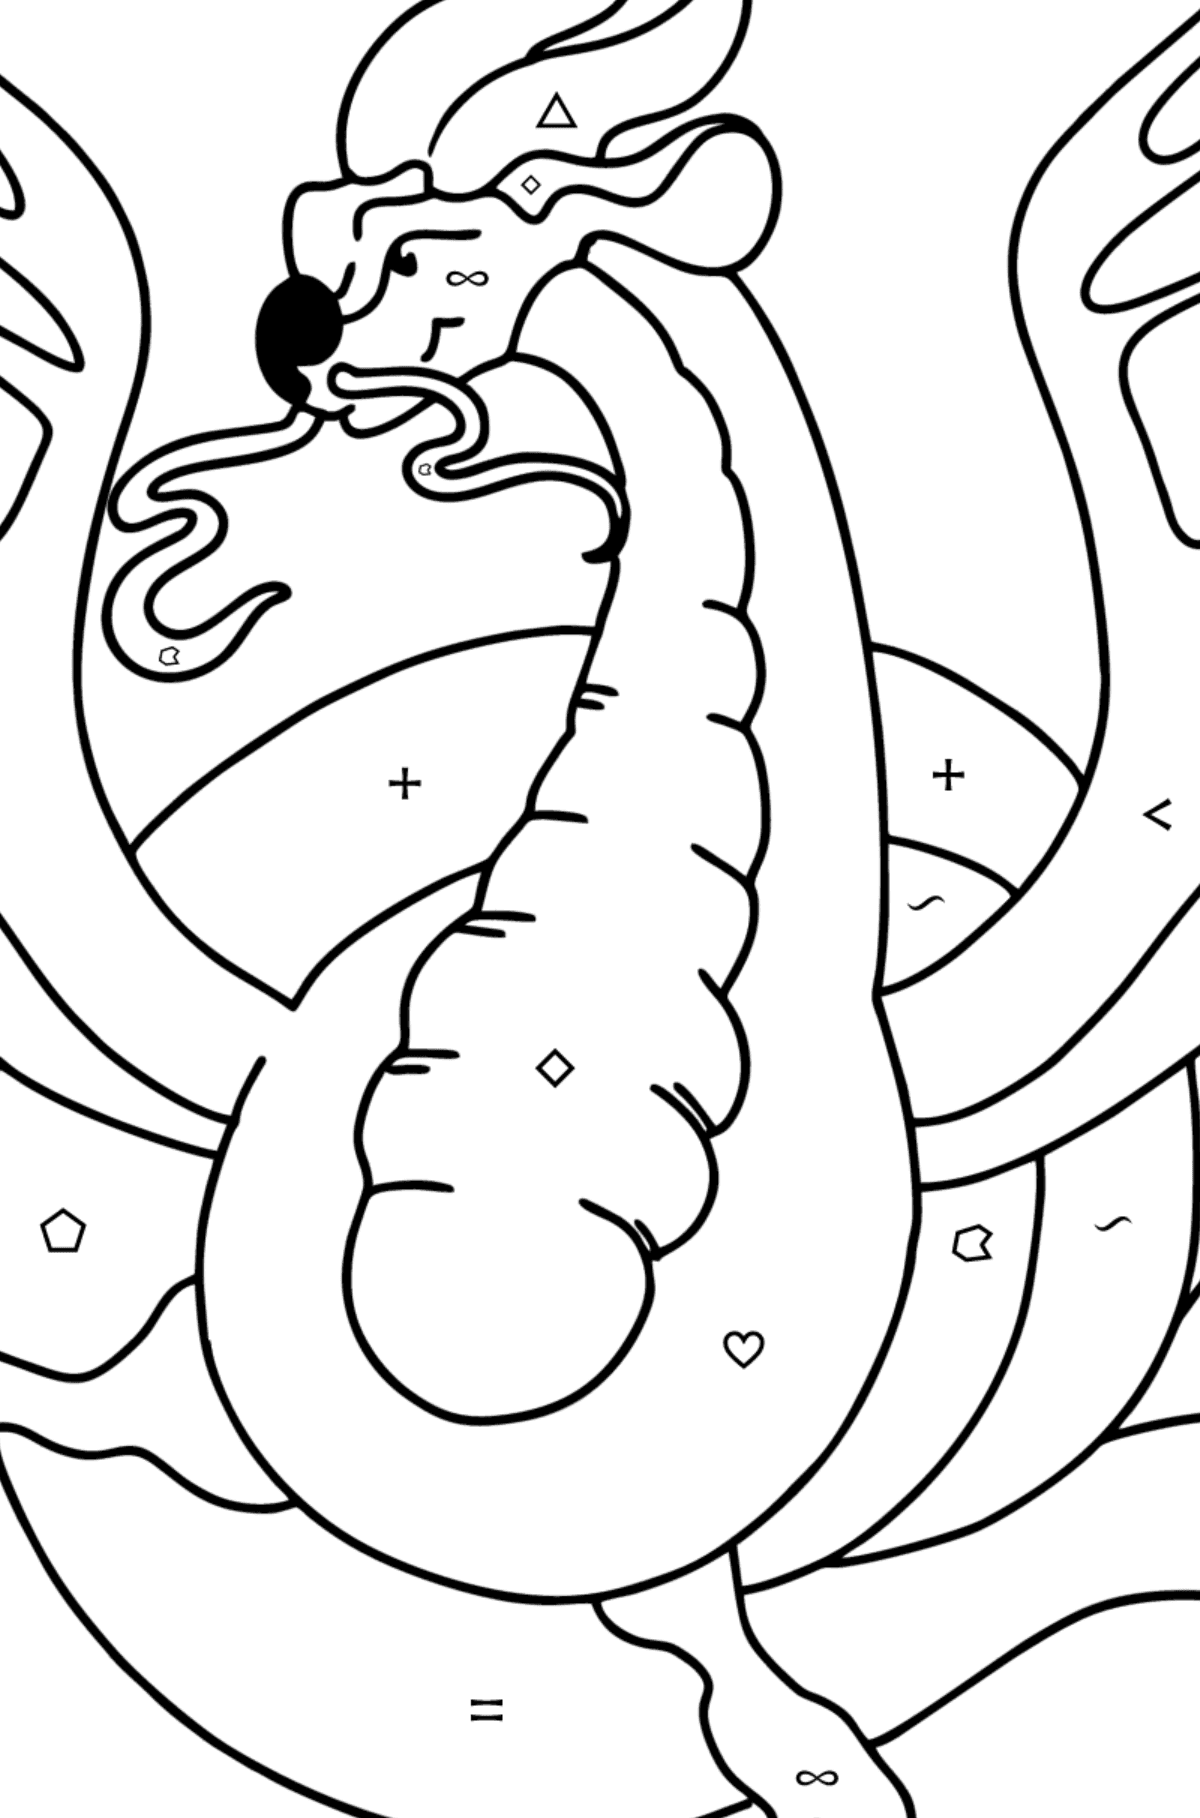 Dangerous Dragon coloring page - Coloring by Symbols and Geometric Shapes for Kids